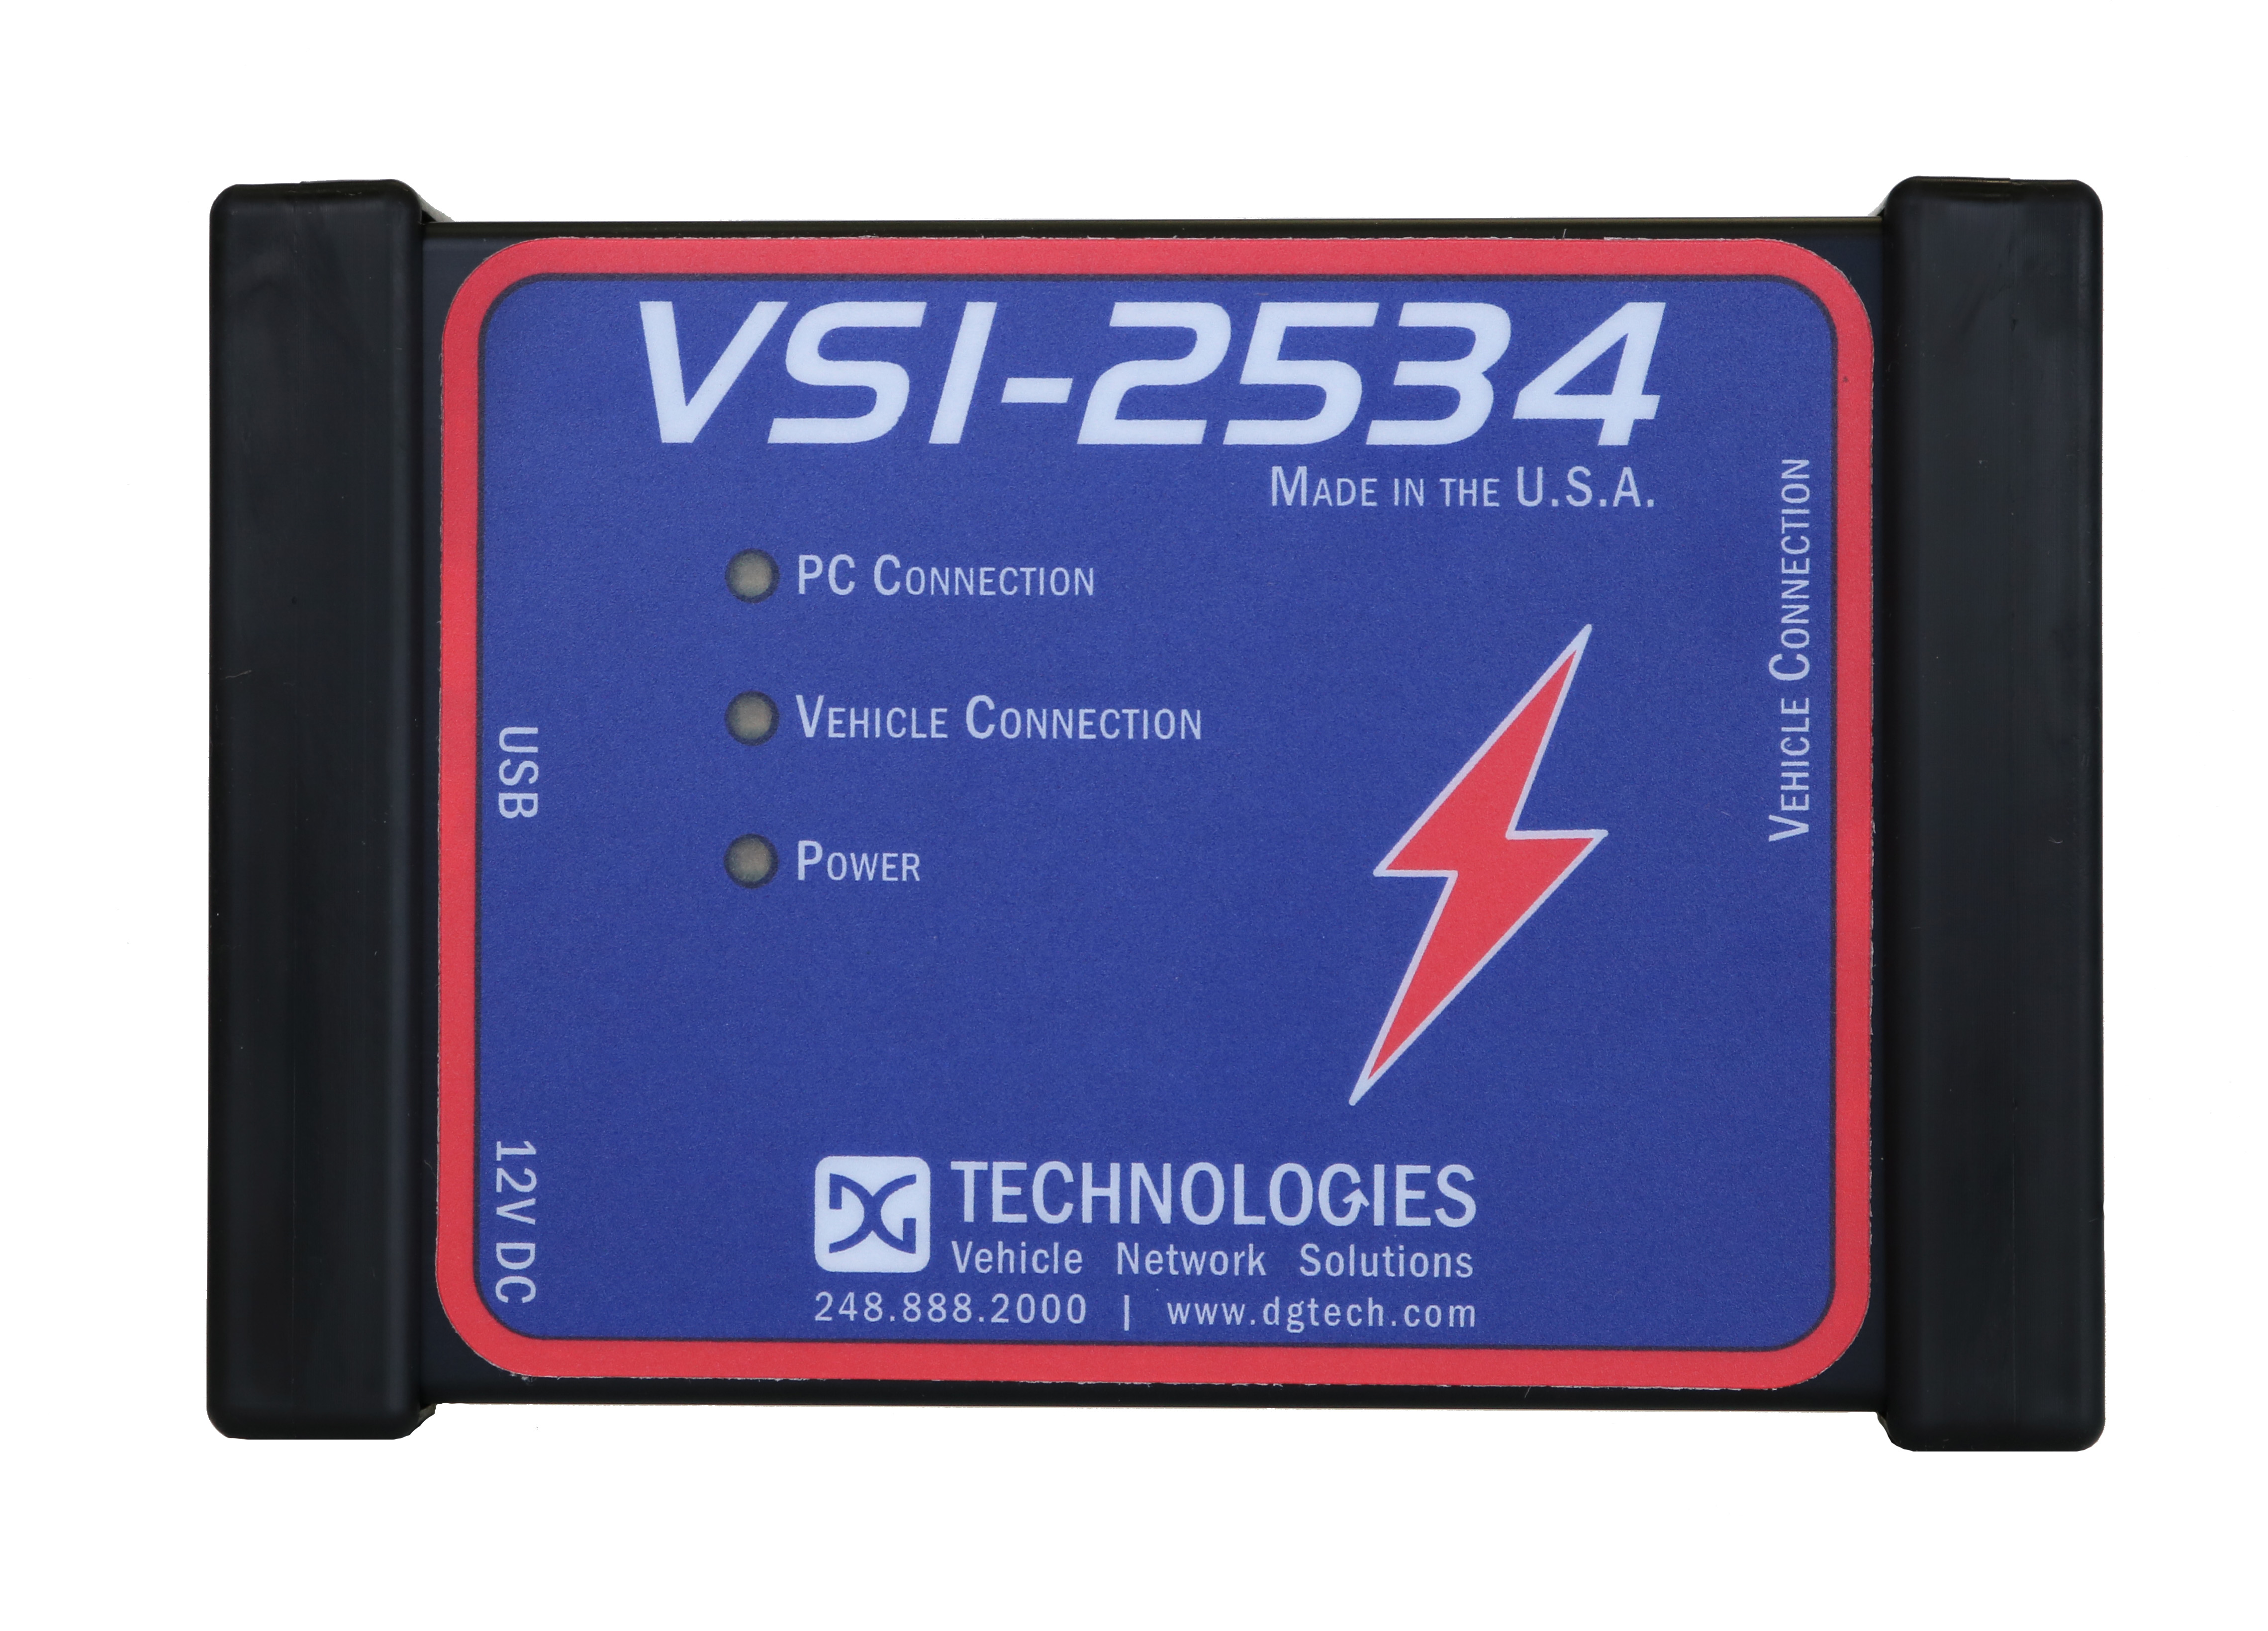 new-vsi-2534-release-available-now-from-dg-technologies-dgtech